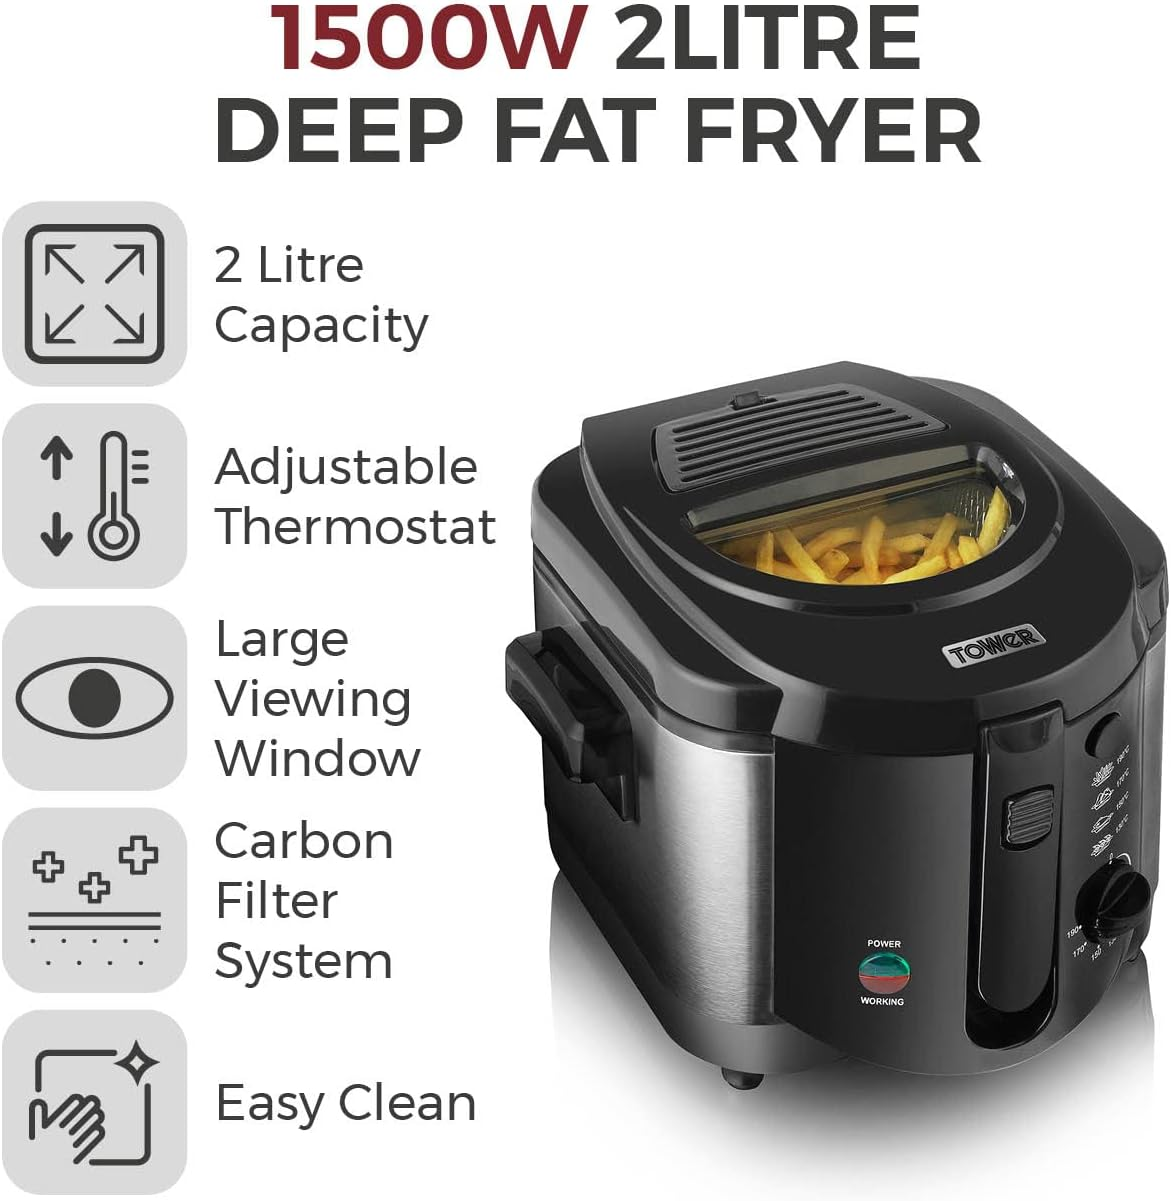 TOWER T17001 Deep Fat Fryer with Adjustable Thermostat, 2L, 1500W, Black